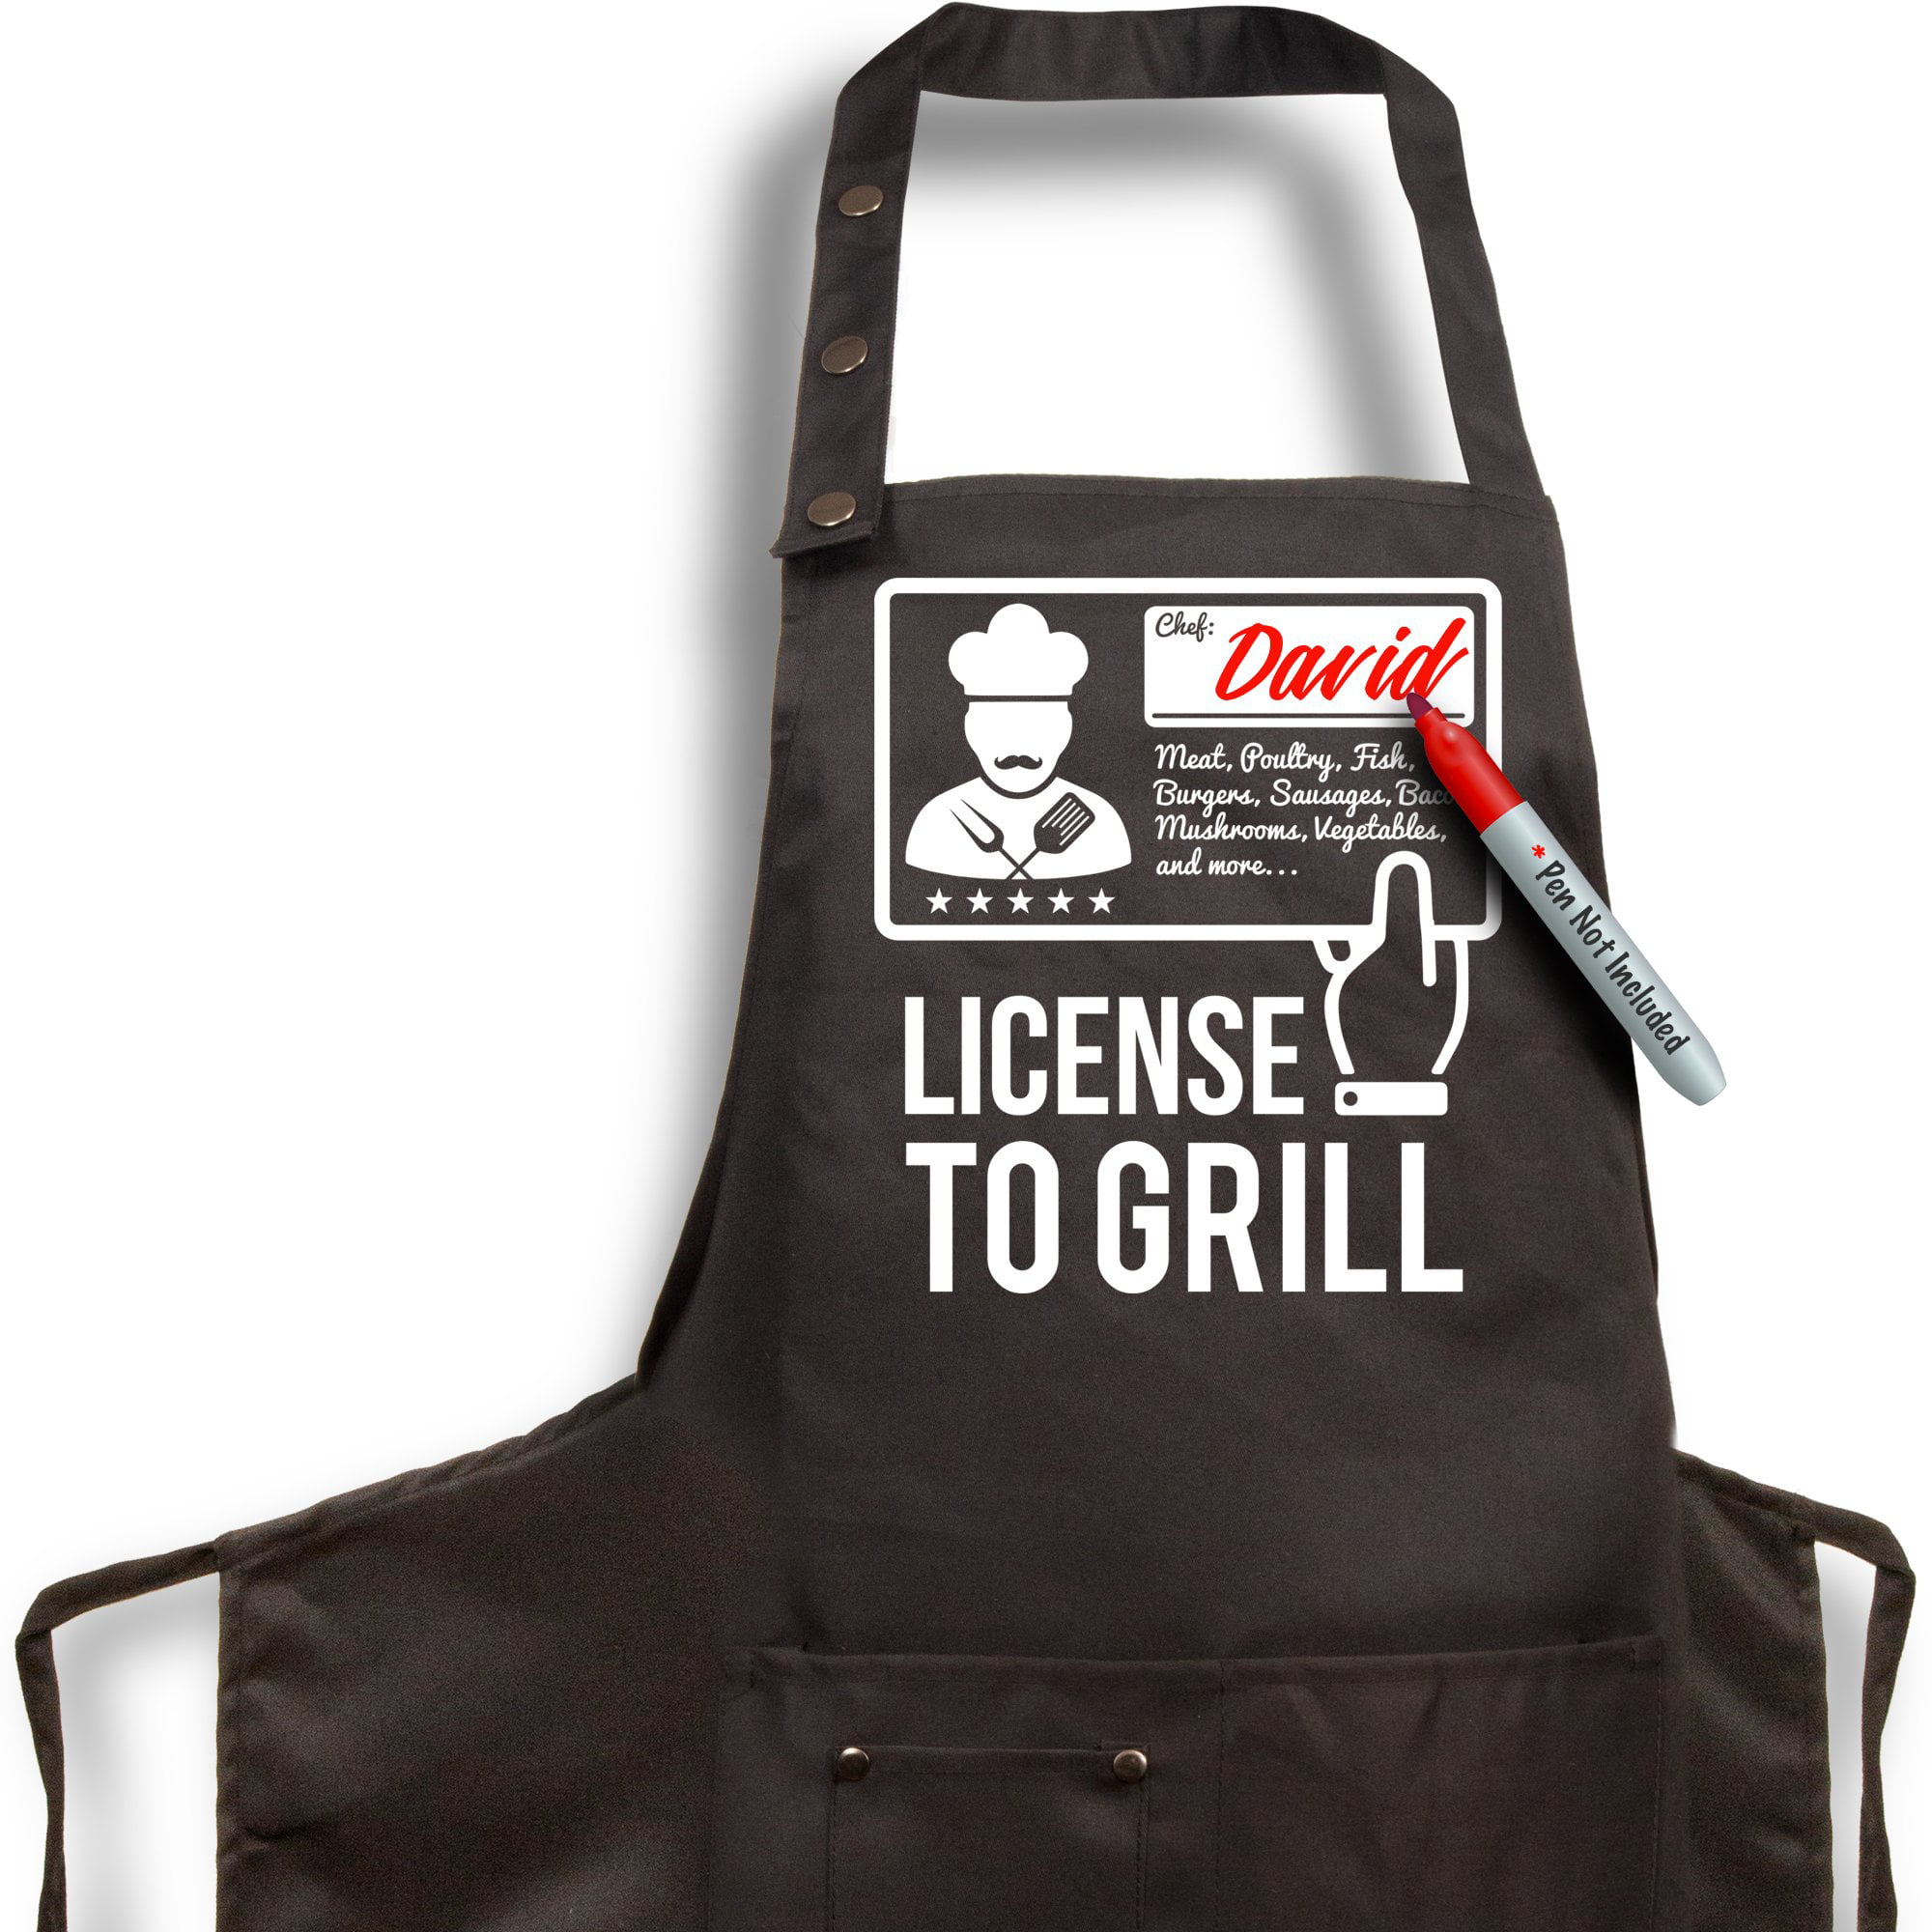 Licence to Grill Design Full Length Adults Novelty Apron BBQ or Kitchen 